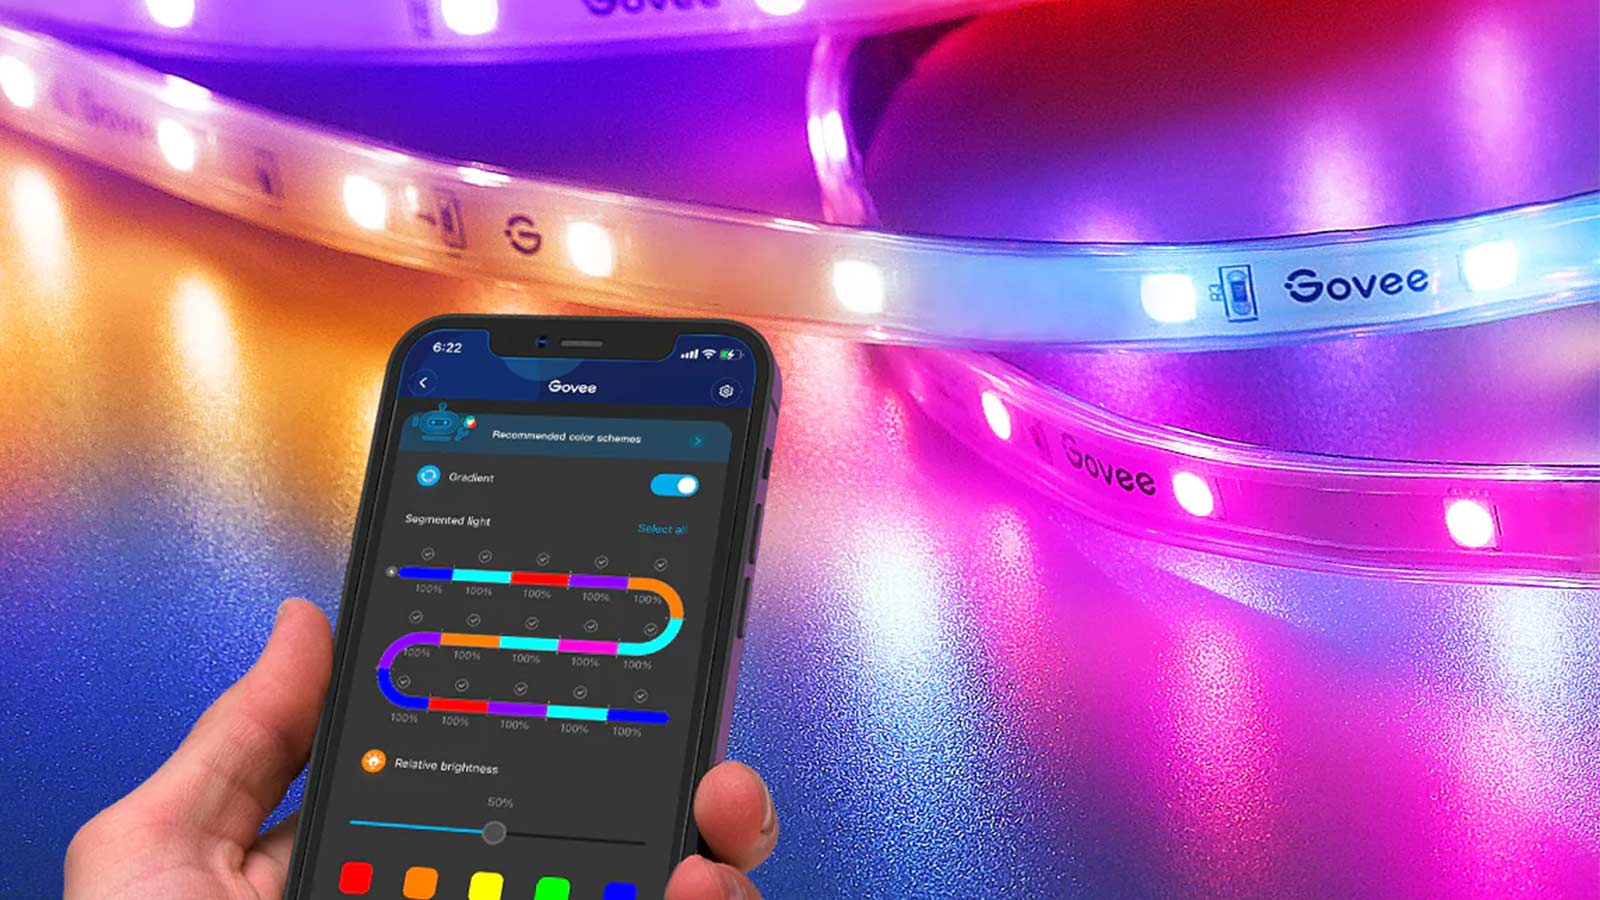 Save up to $50 on Govee smart lighting during this early  Prime Day  sale